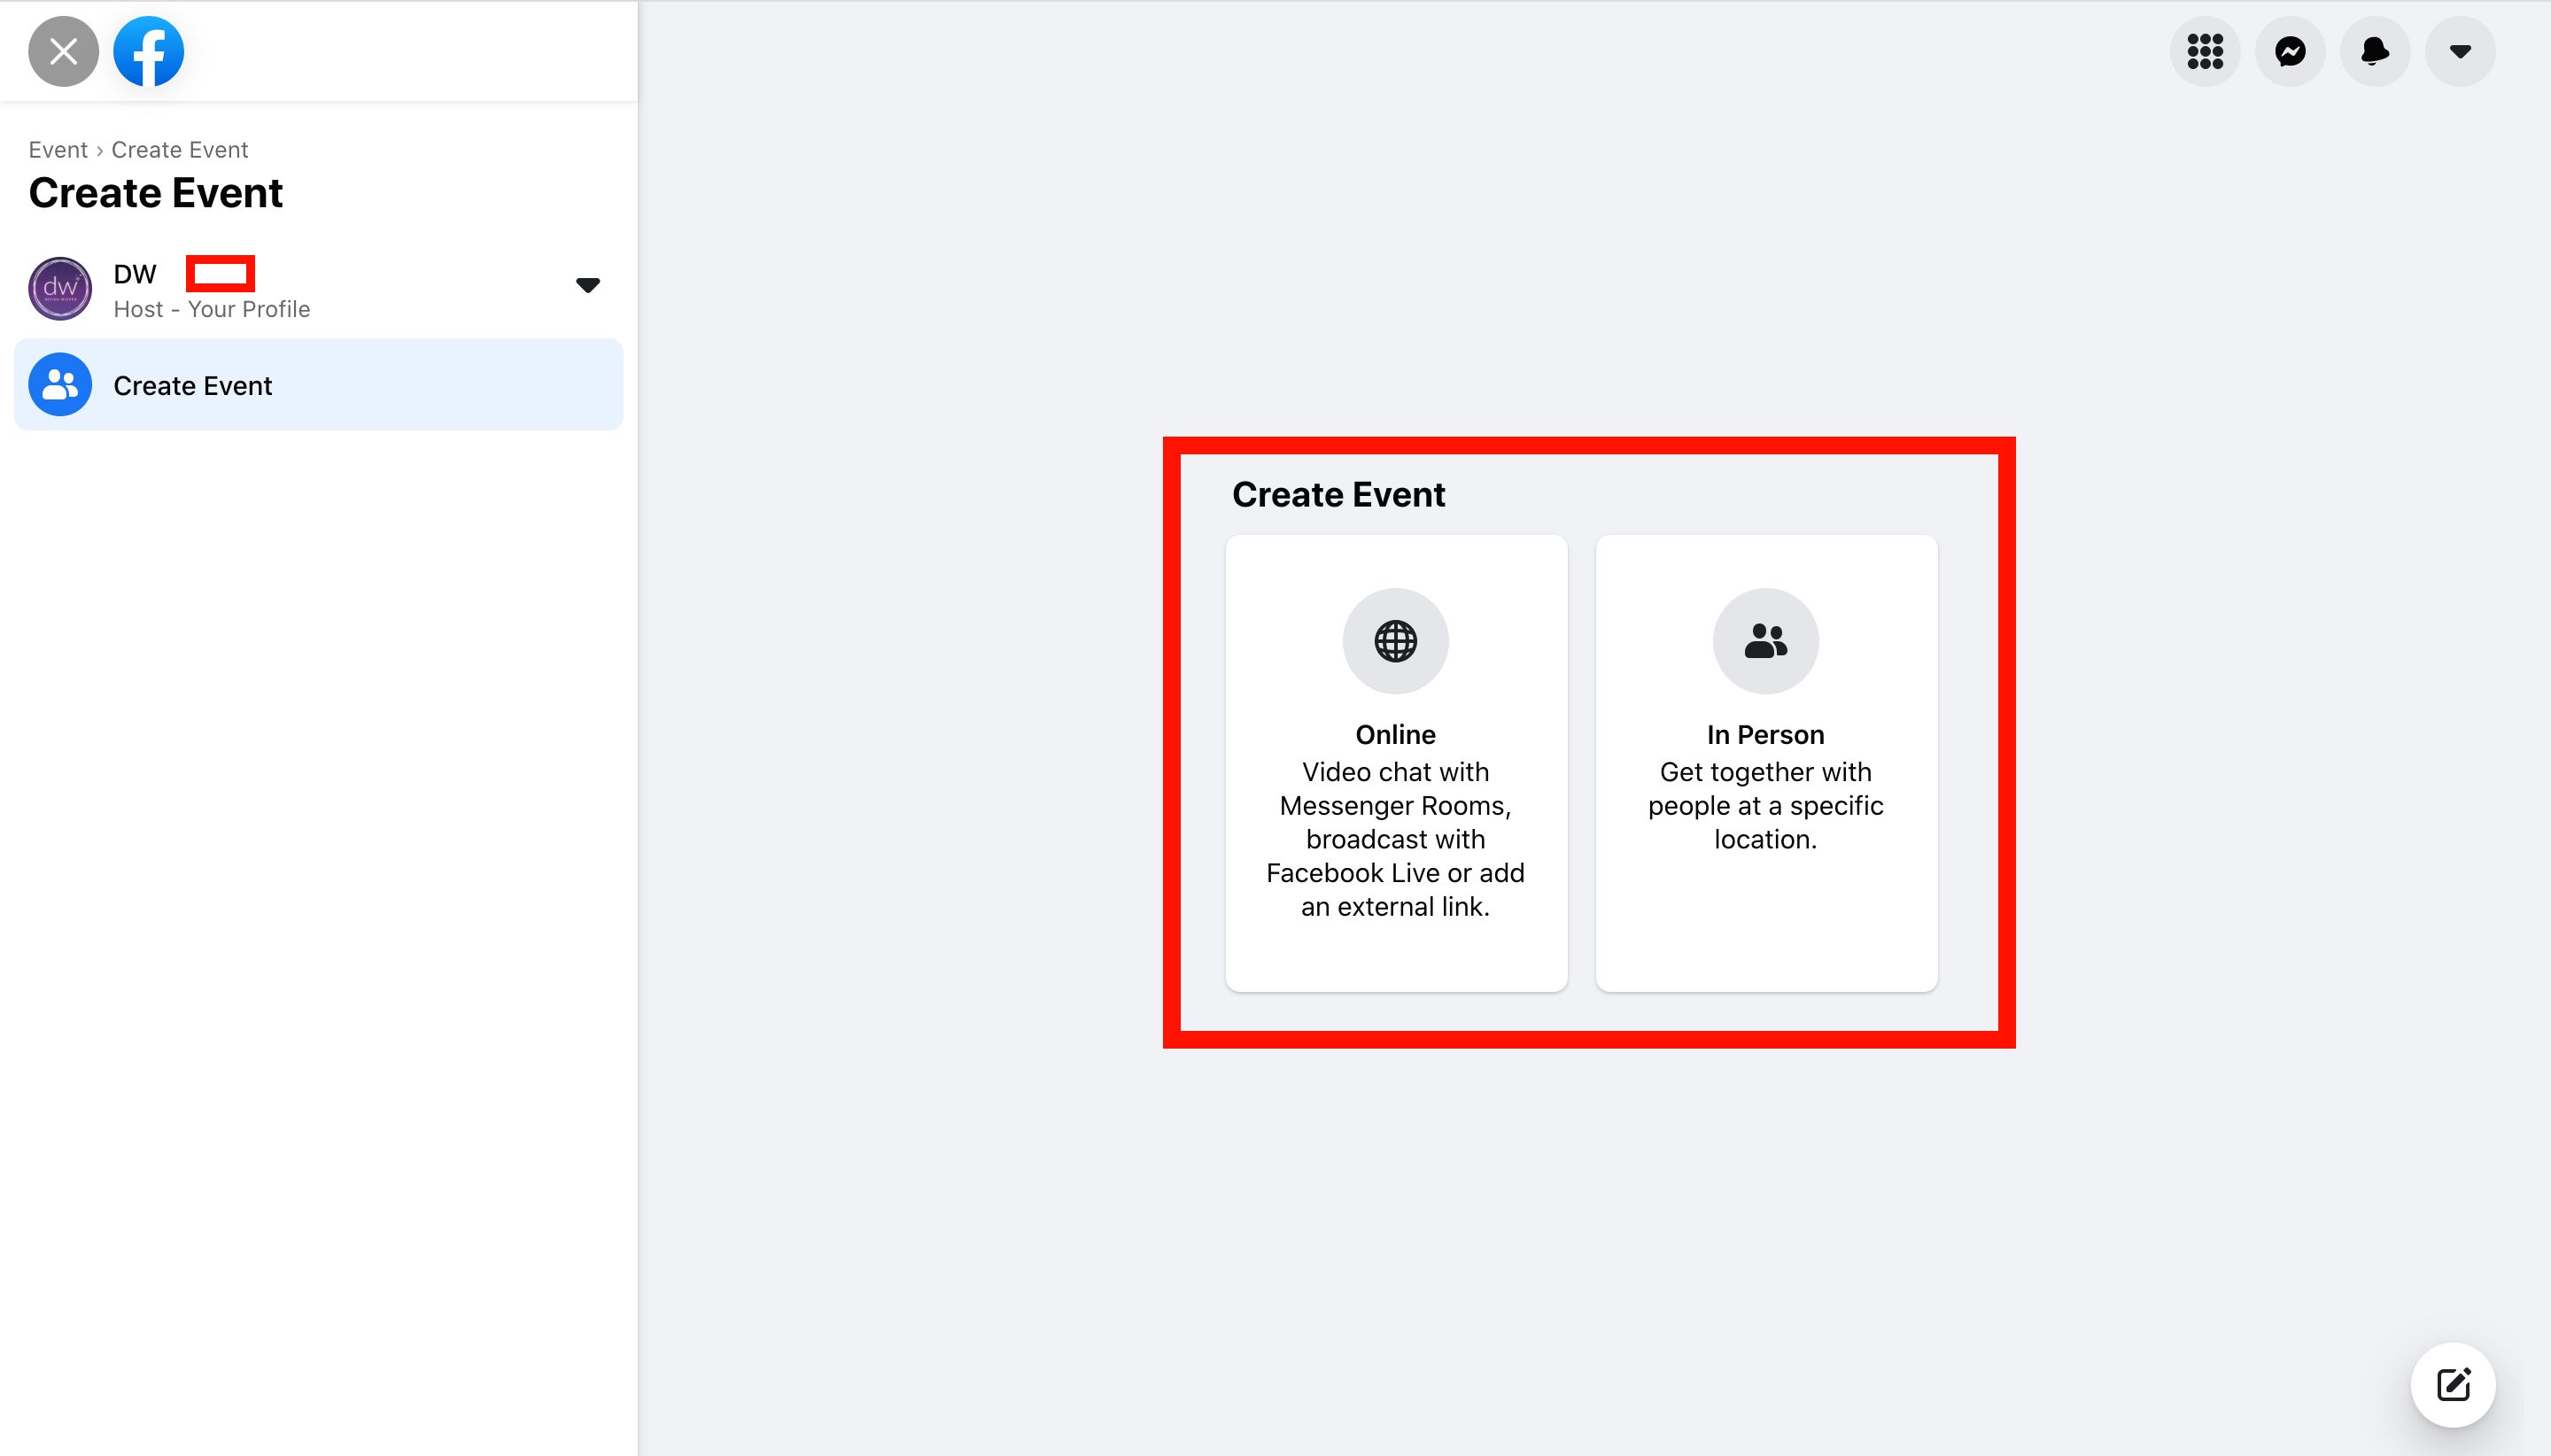 Screenshot of Online and In Person Event options - Best practices for choosing photo sizes for Facebook events - Image